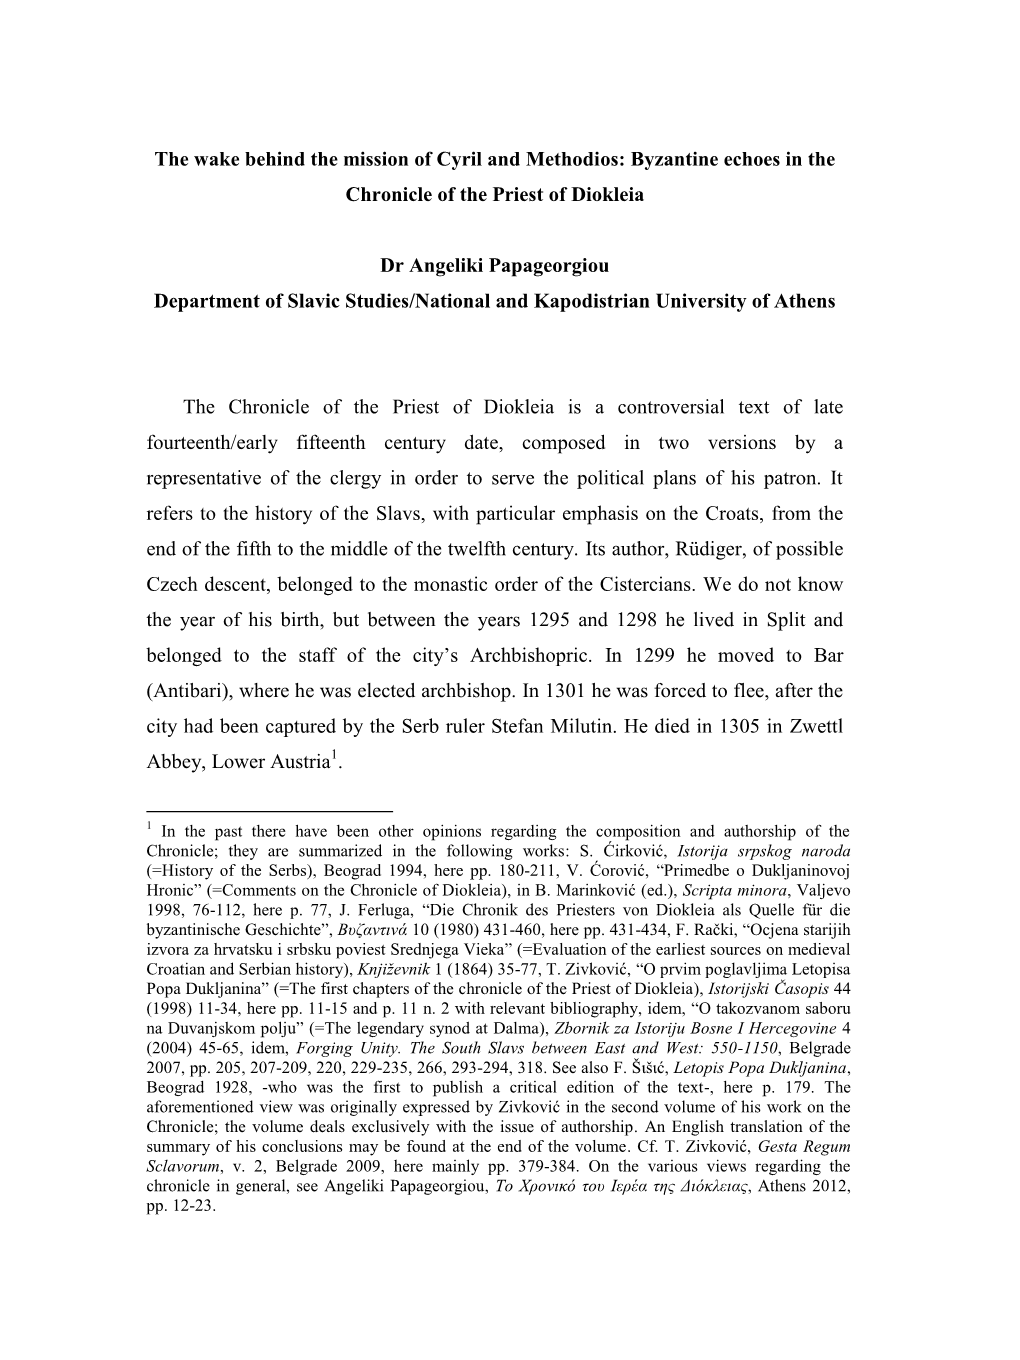 The Wake Behind the Mission of Cyril and Methodios: Byzantine Echoes in the Chronicle of the Priest of Diokleia